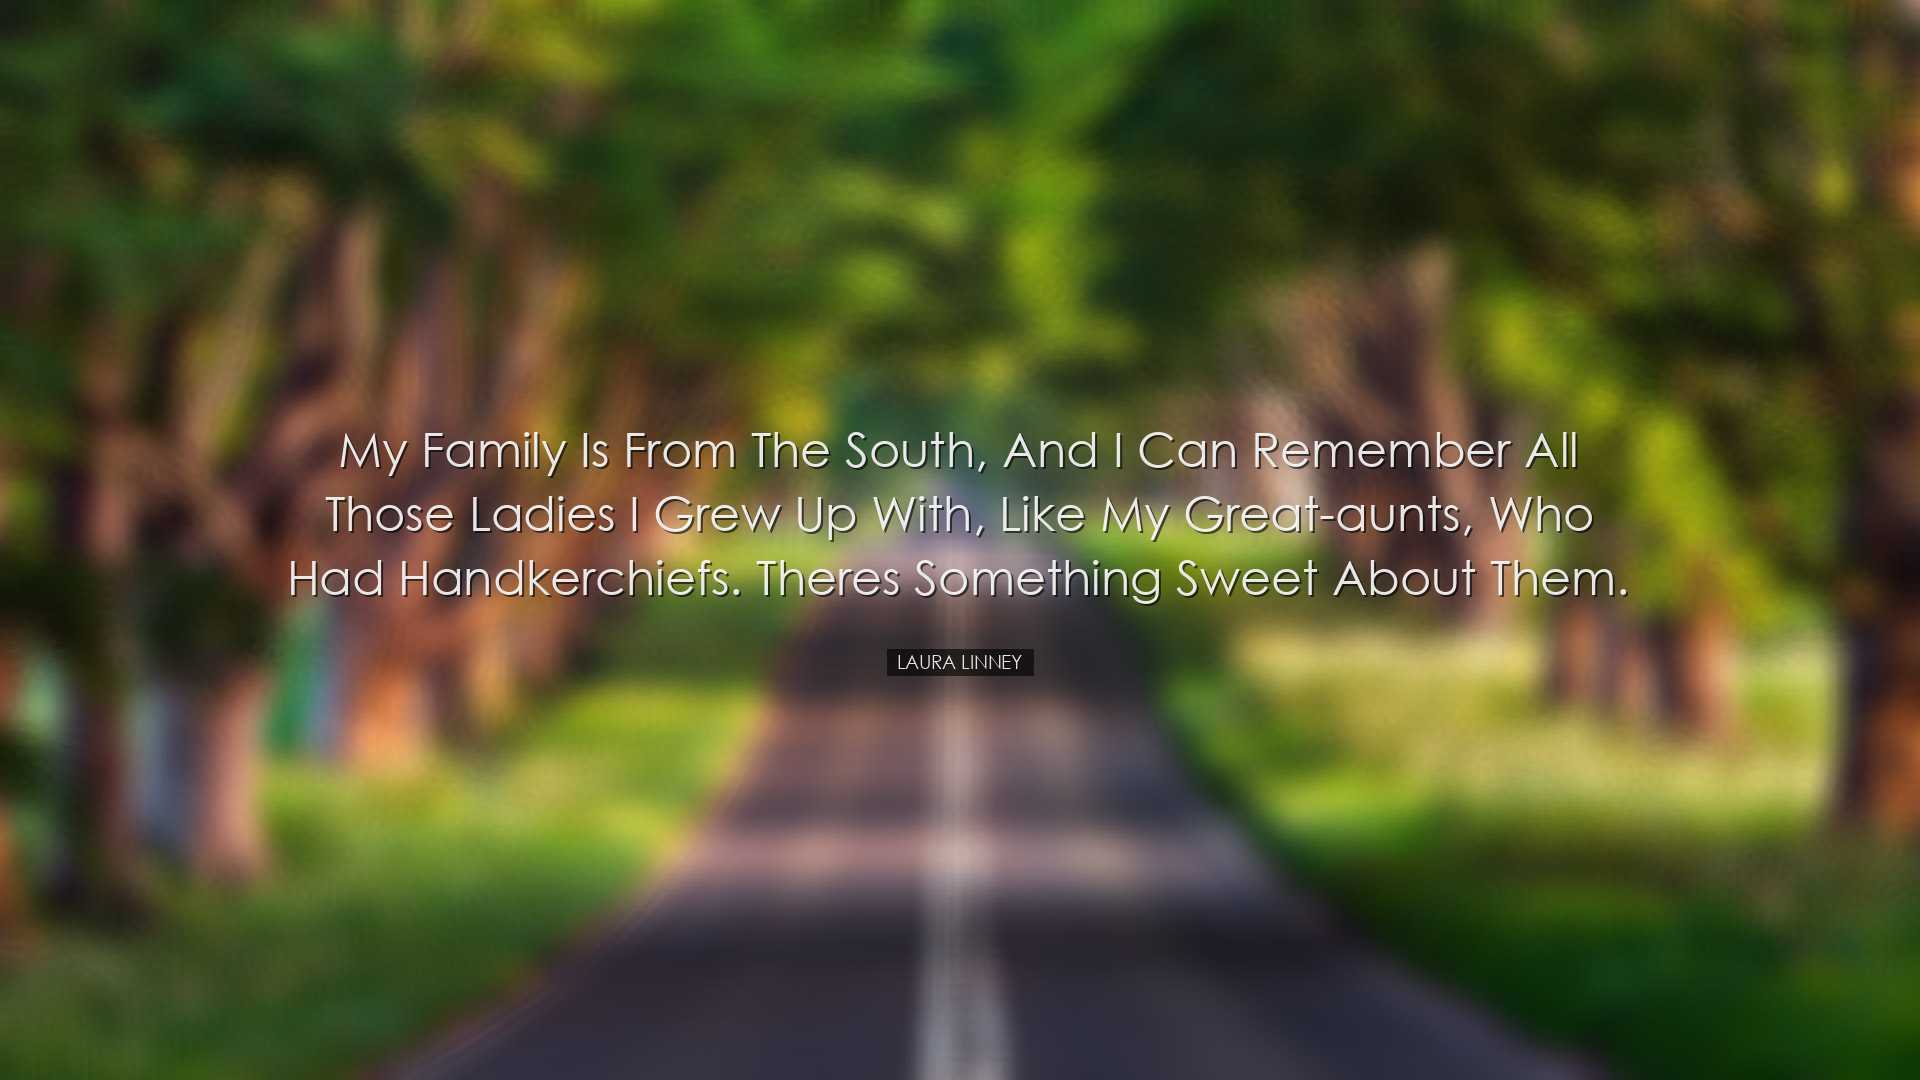 My family is from the South, and I can remember all those ladies I